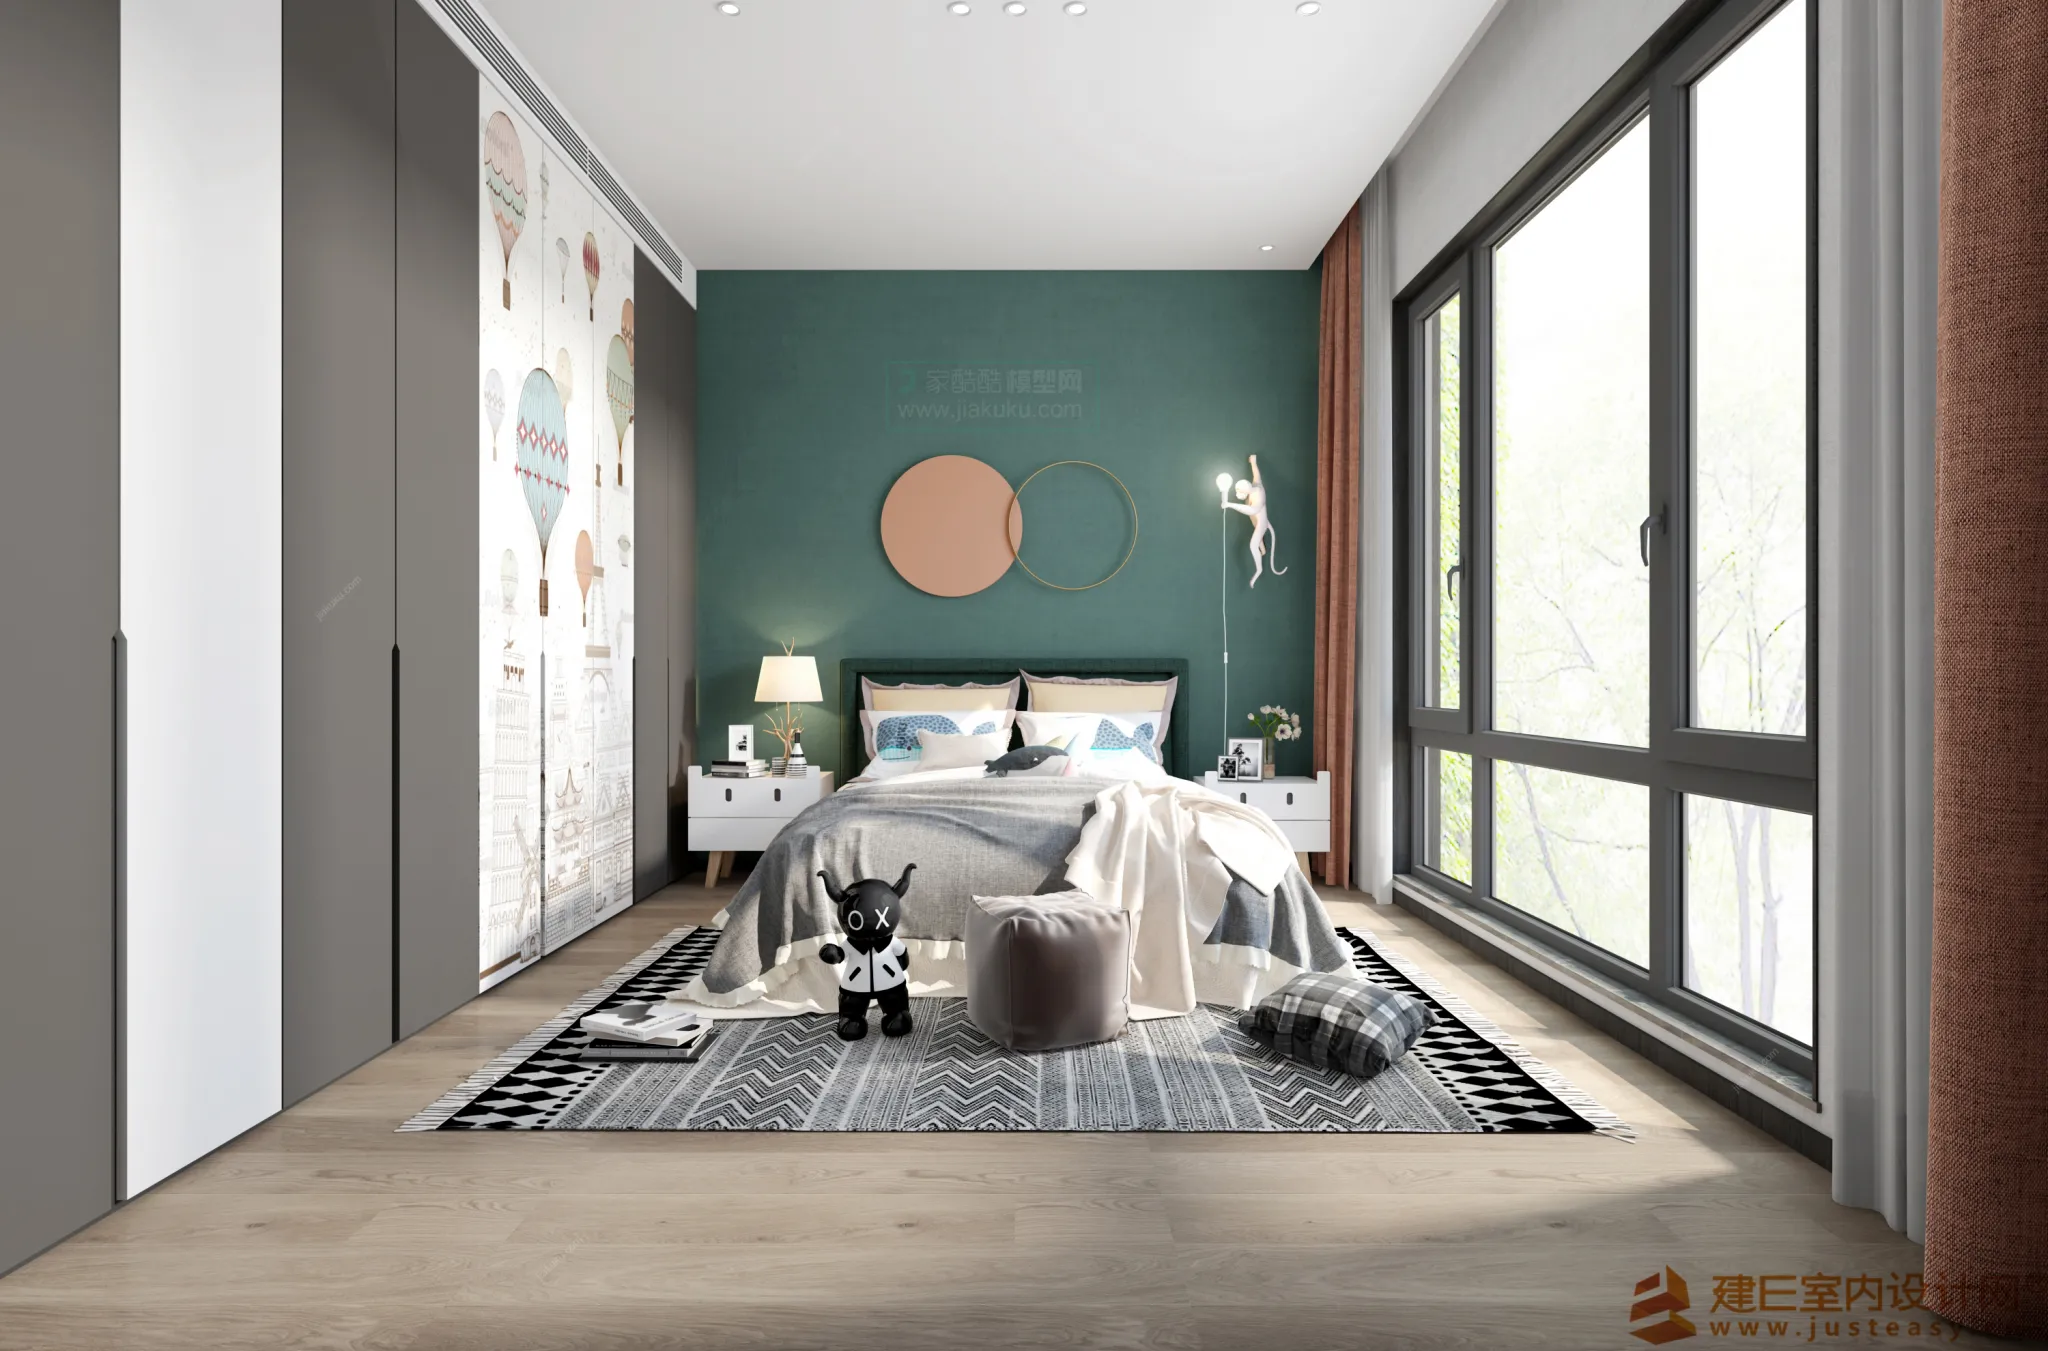 Justeasy 20 – House Space – 08 – CHILDRENROOM – Ff02